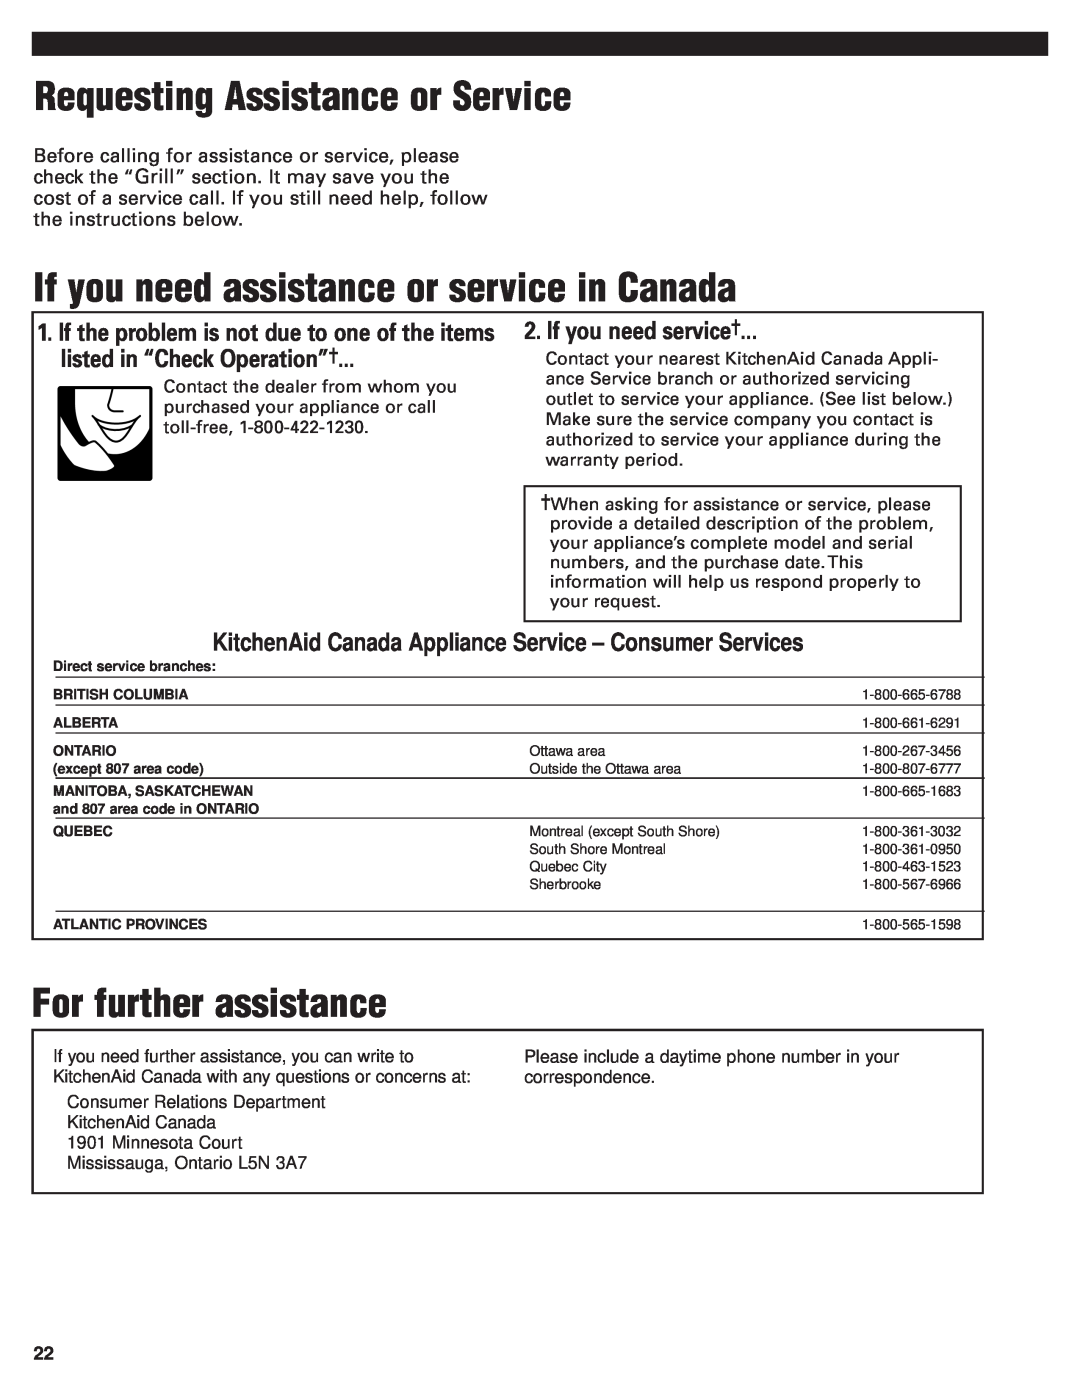 KitchenAid KBGN364, KFGR382 If you need assistance or service in Canada, listed in “Check Operation”, If you need service 